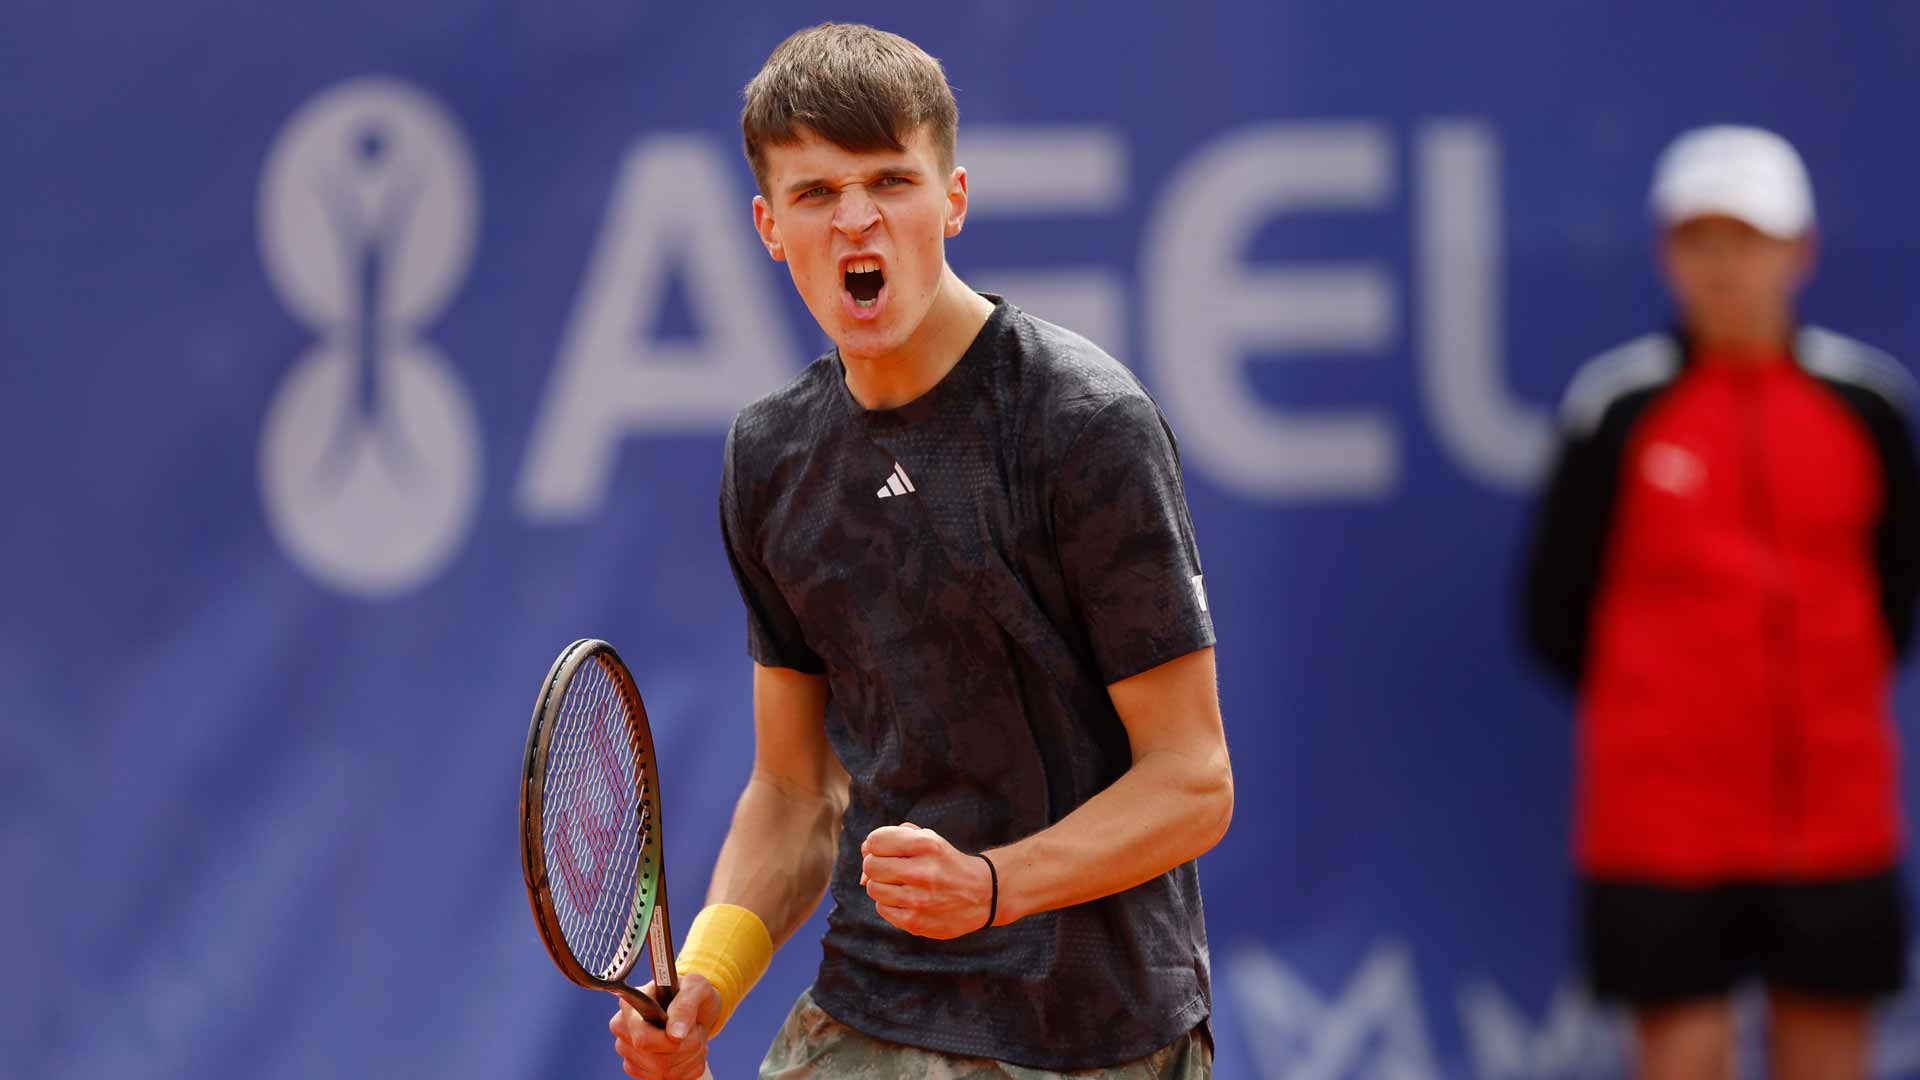 Jakub Mensik in action at the Prague-2 Challenger, where he won his maiden Challenger title.